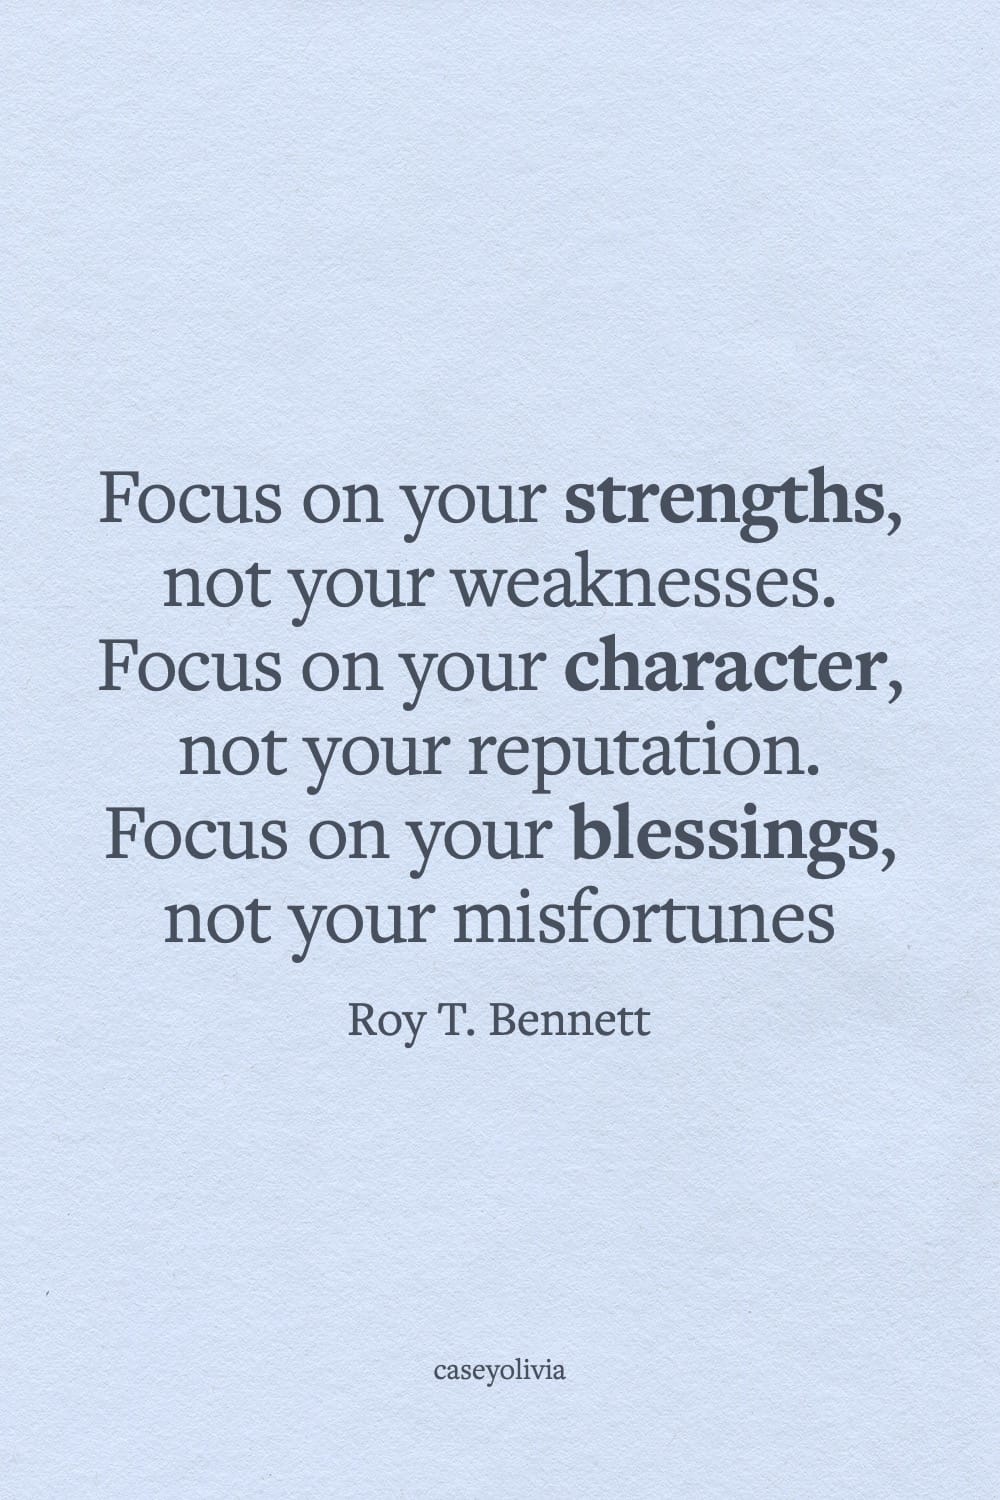 focus on your strengths quote about optimism from roy t bennett